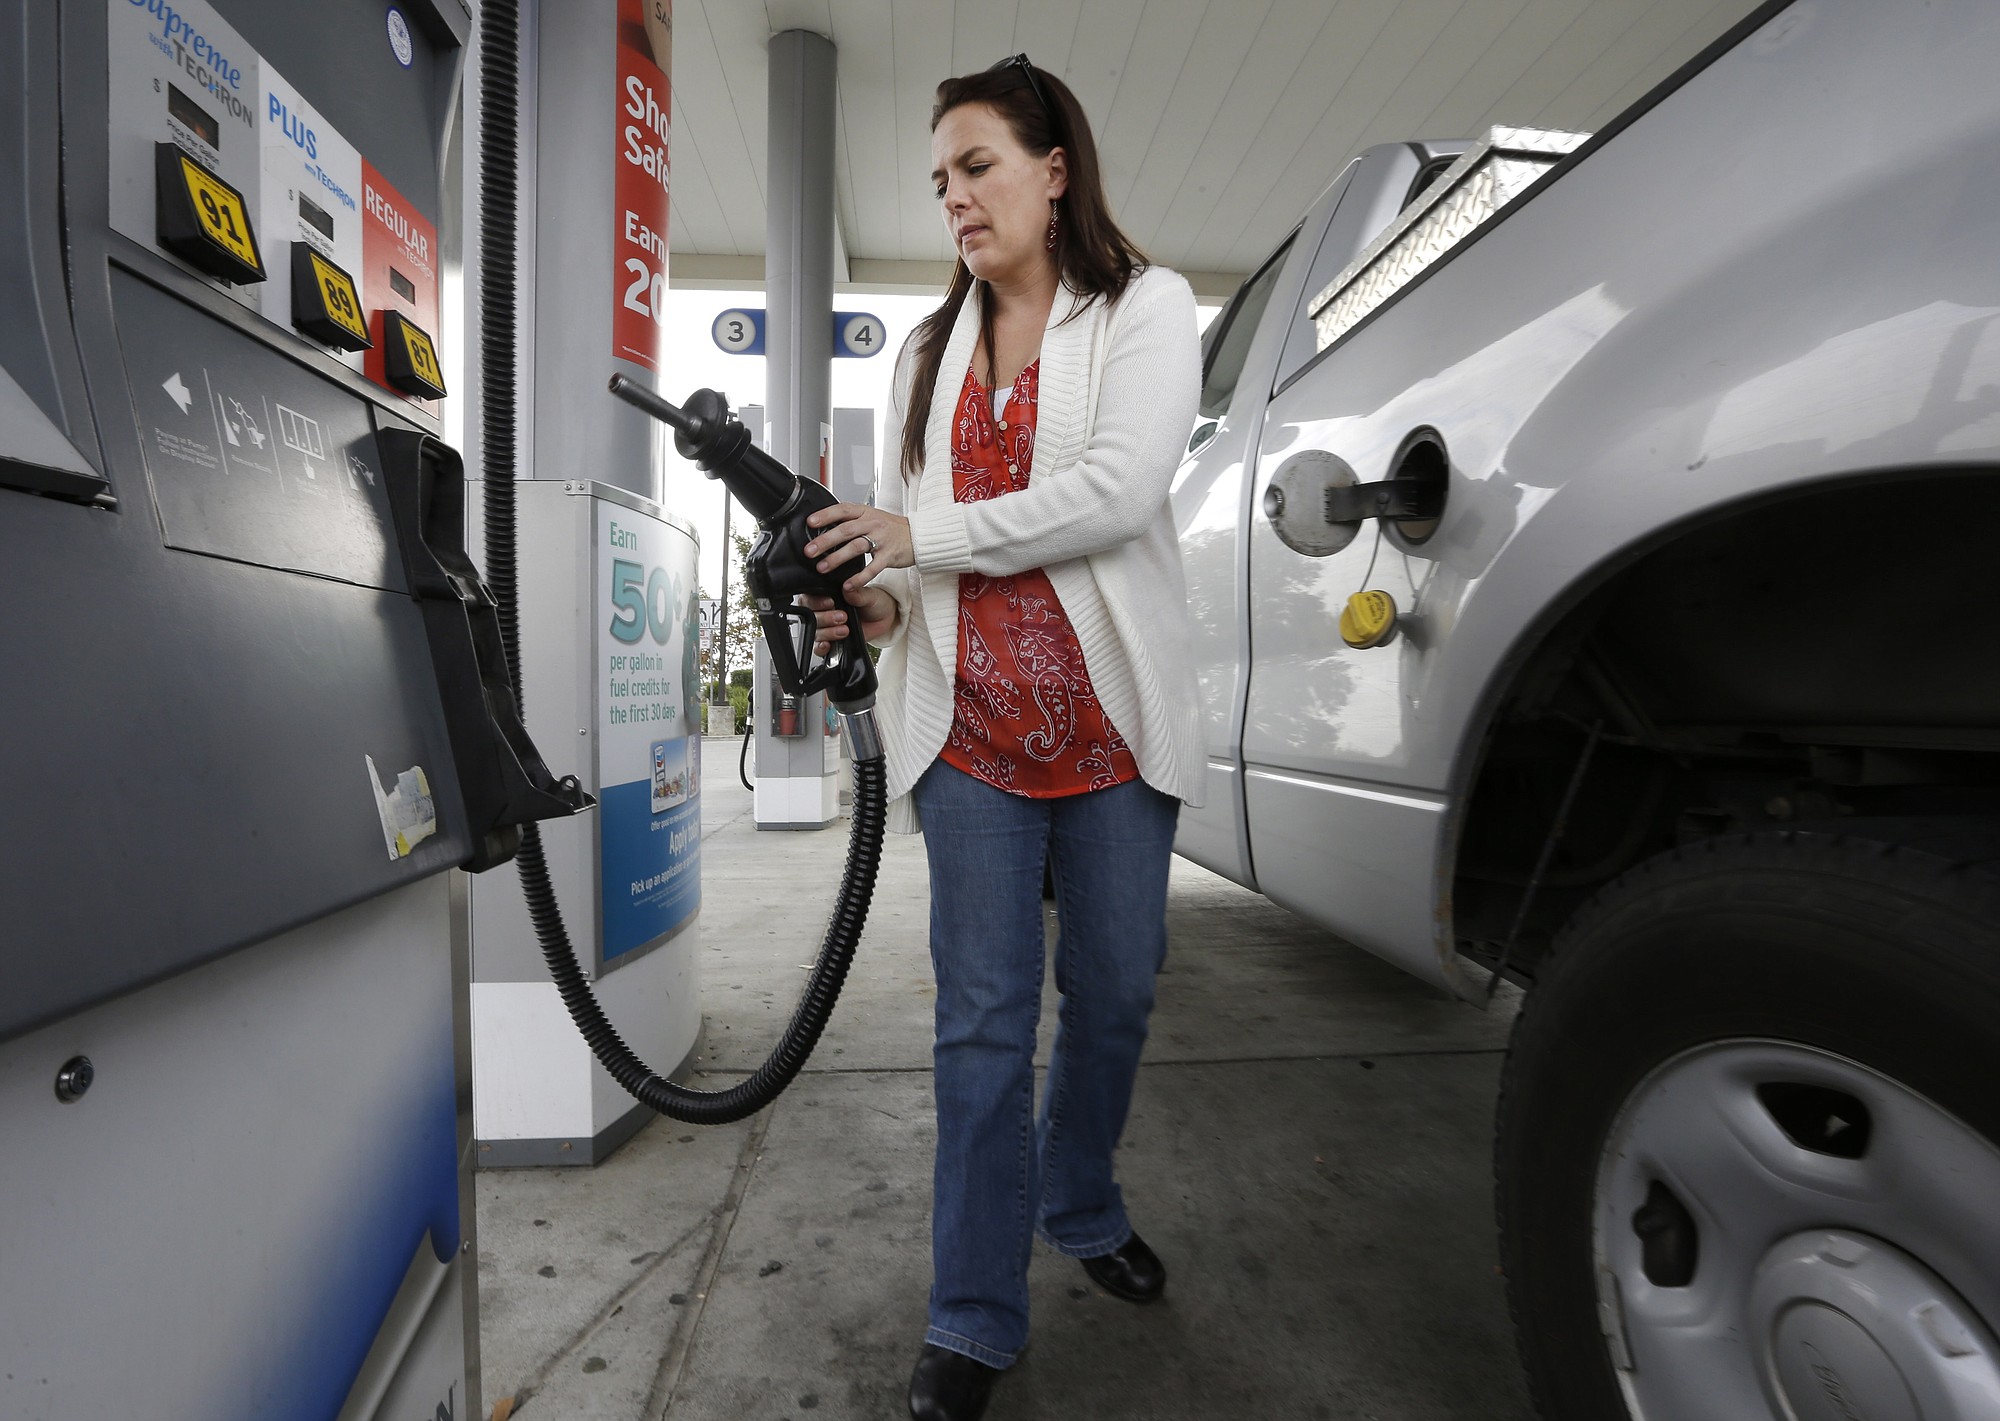 Lydia Holland replaces the gas nozzle after filling up at a gas station in Sacramento, Calif. The Energy Department on Tuesday again slashed its prediction for next year?s average price of gasoline across the U.S., this time to $2.60 a gallon. That's 23 percent below the projected average for this year and the lowest since 2009.